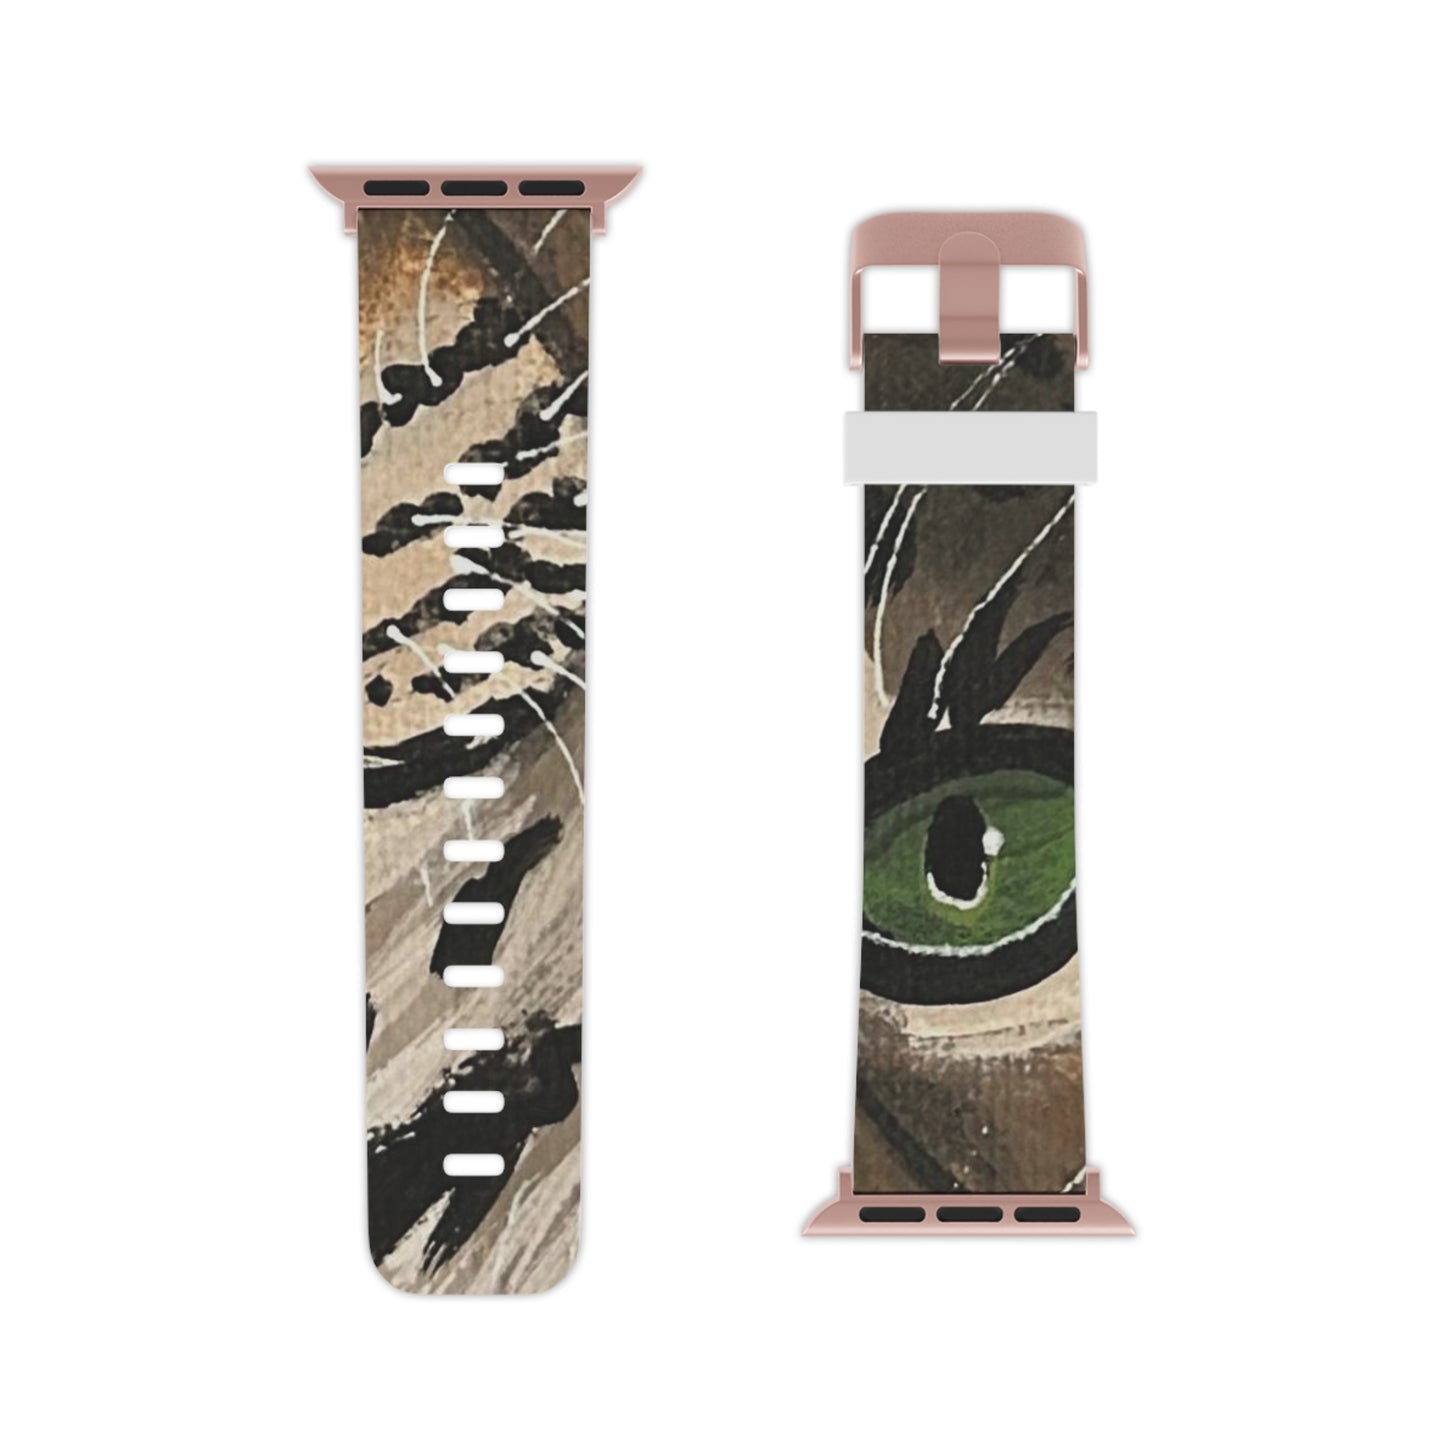 Wild Cat - Watch Band for Apple Watch